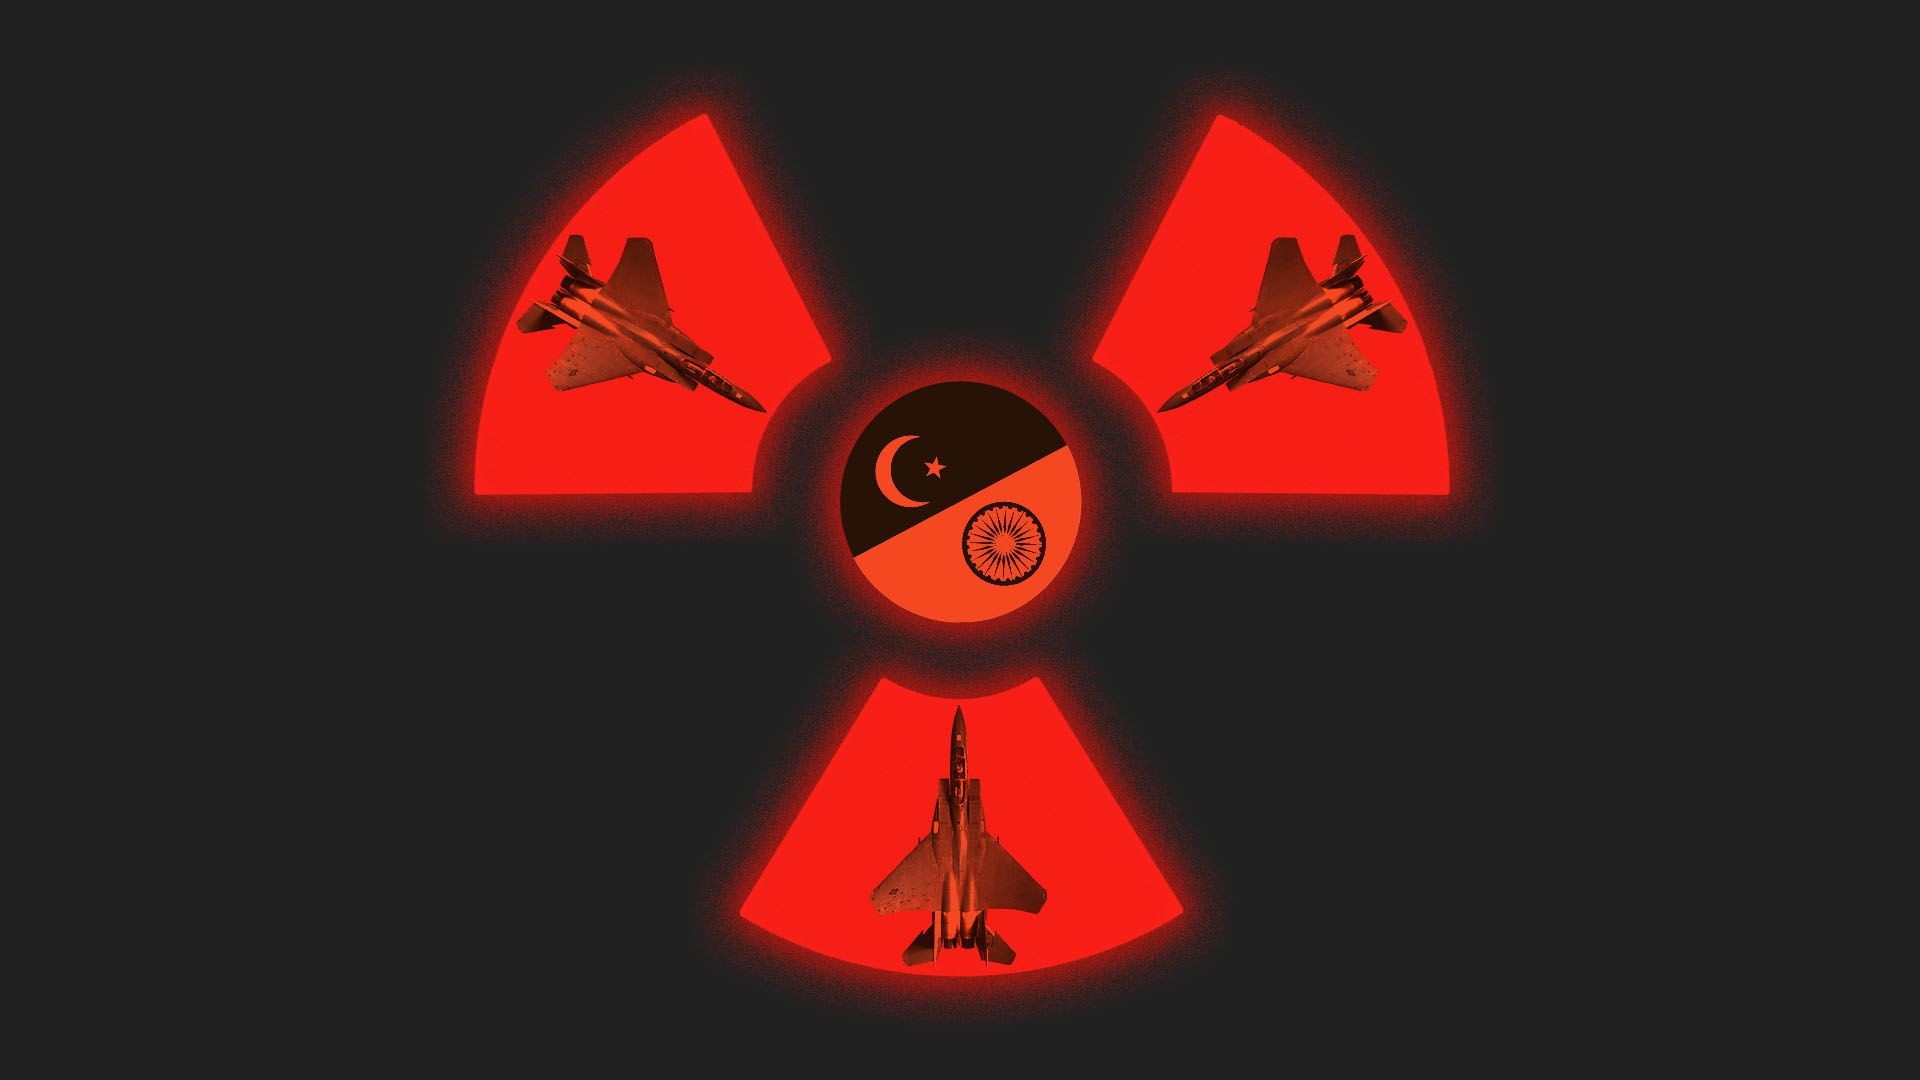 1920x1080 Illustration of nuclear war symbol made up of fighter jets and flags of  Pakistan and India